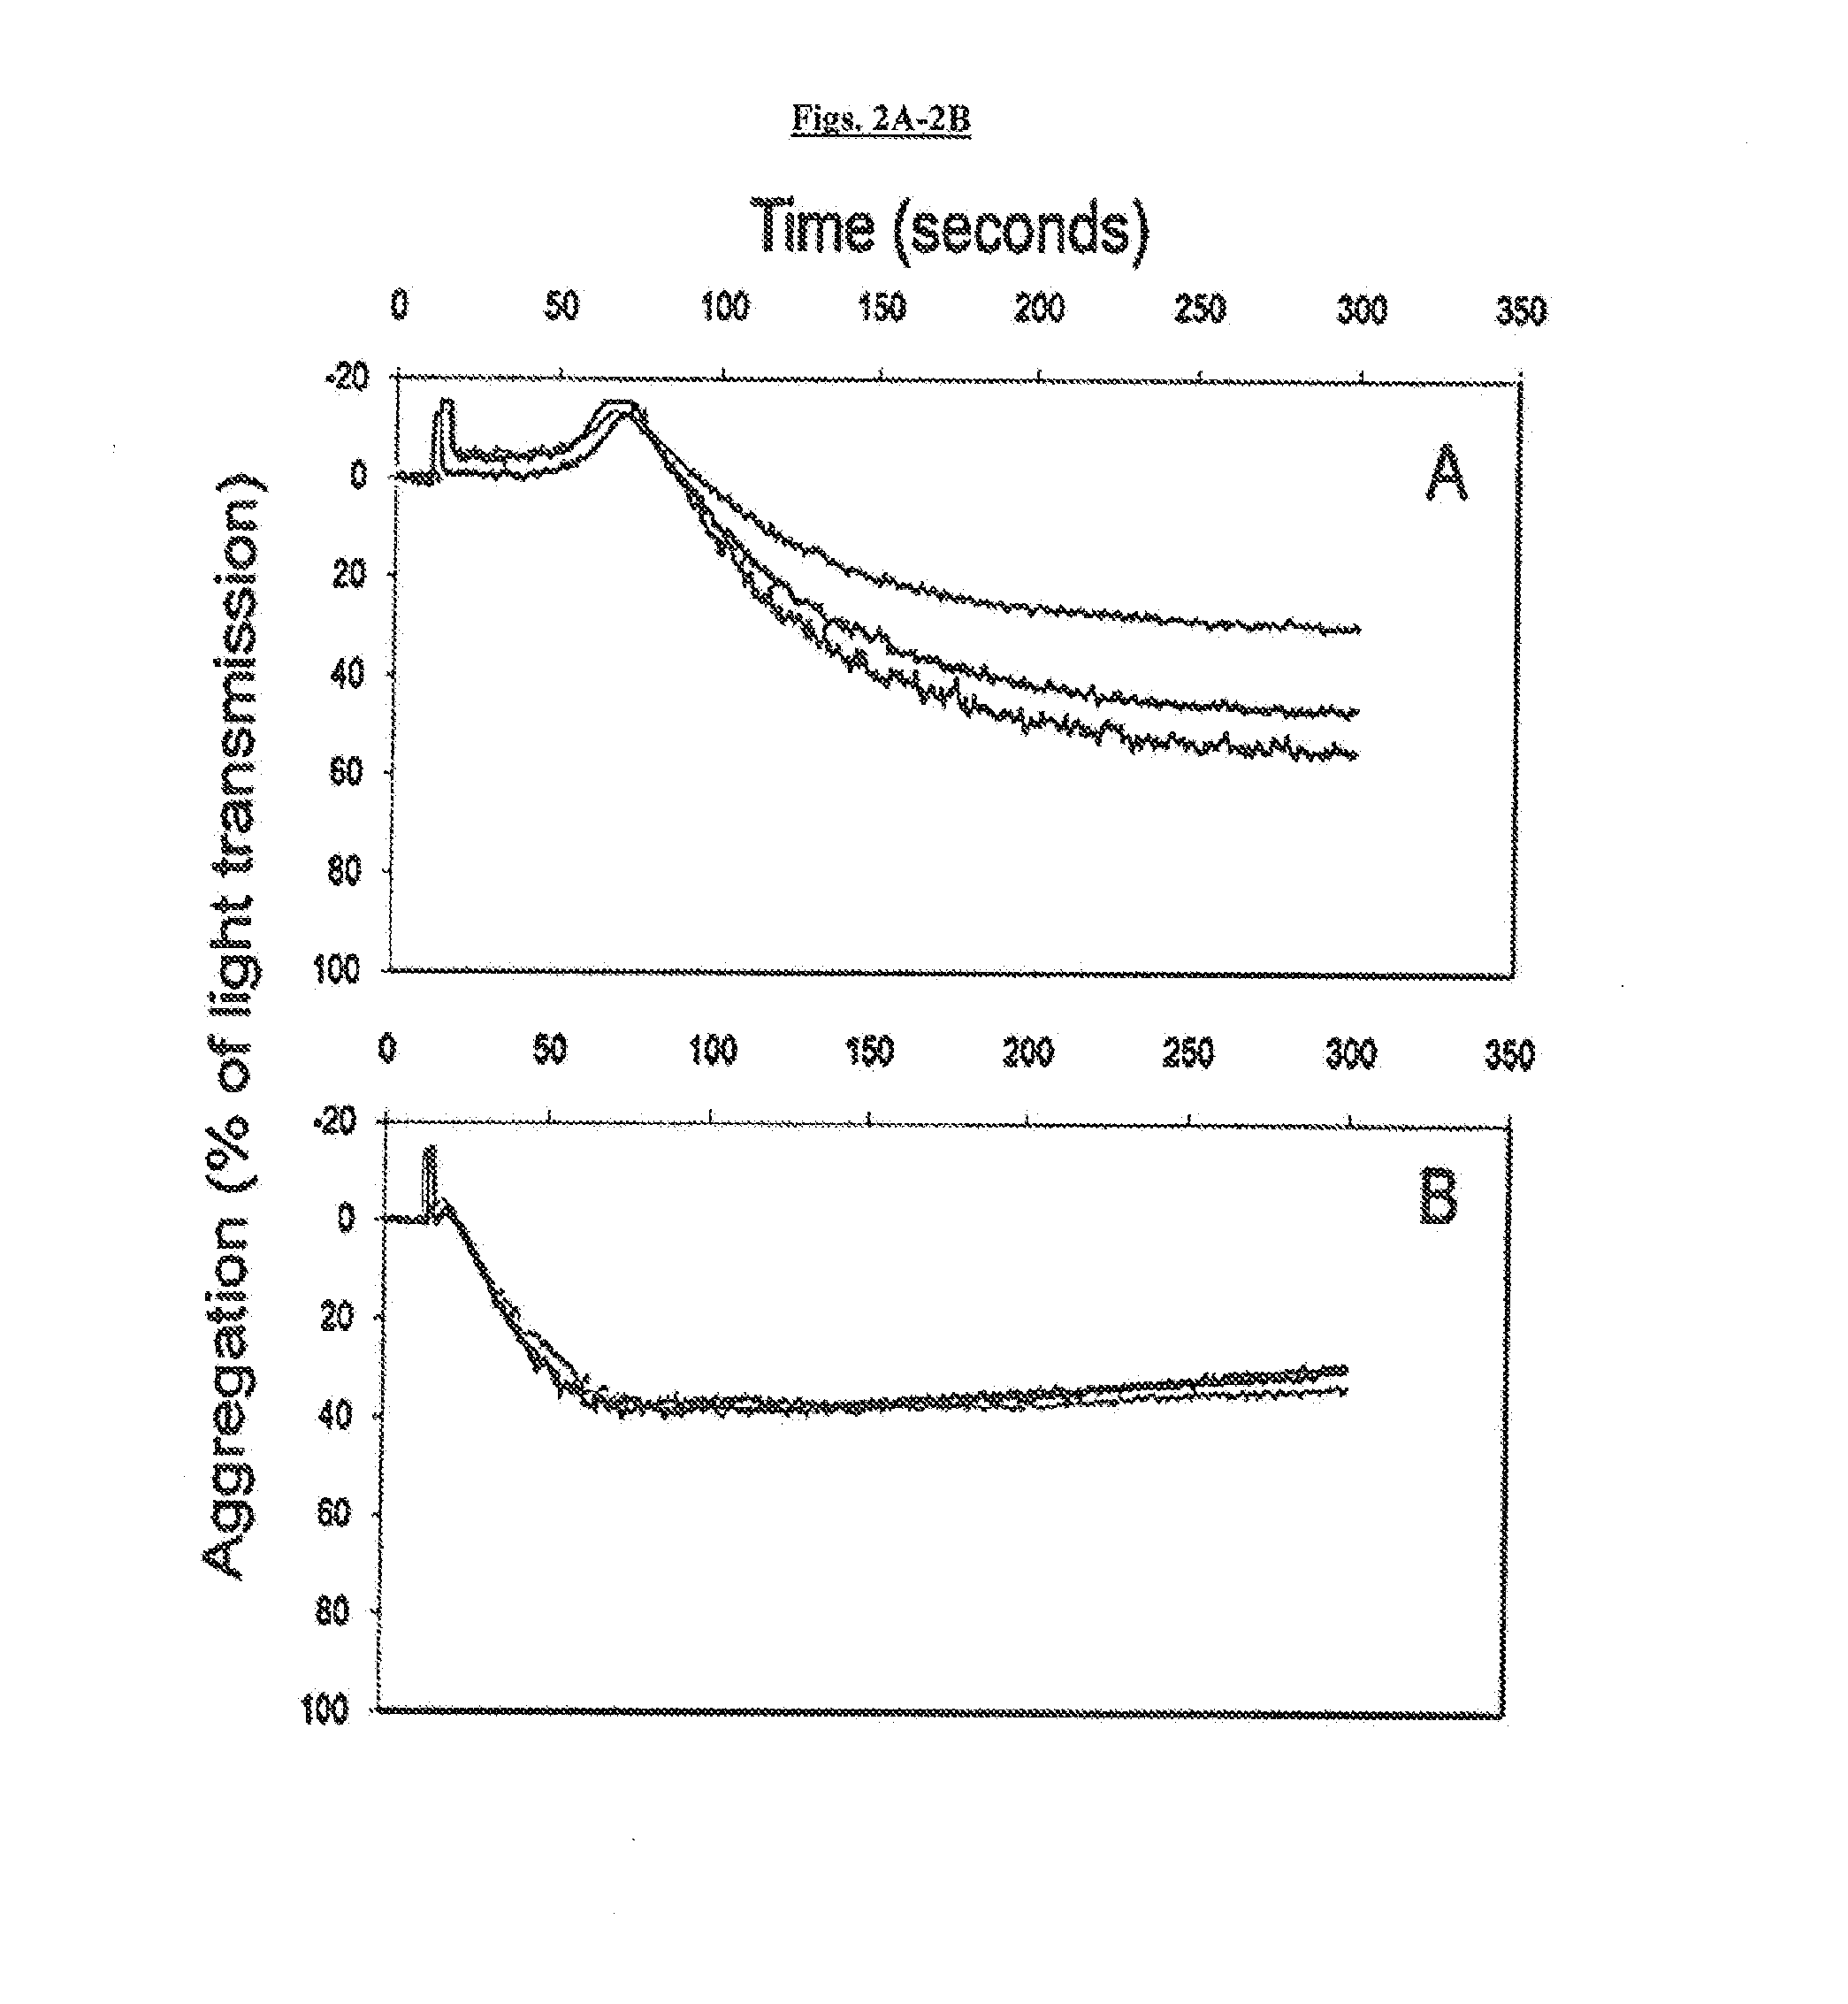 Novel compositions and methods of preventing or ameliorating abnormal thrombus formation and cardiovascular disease